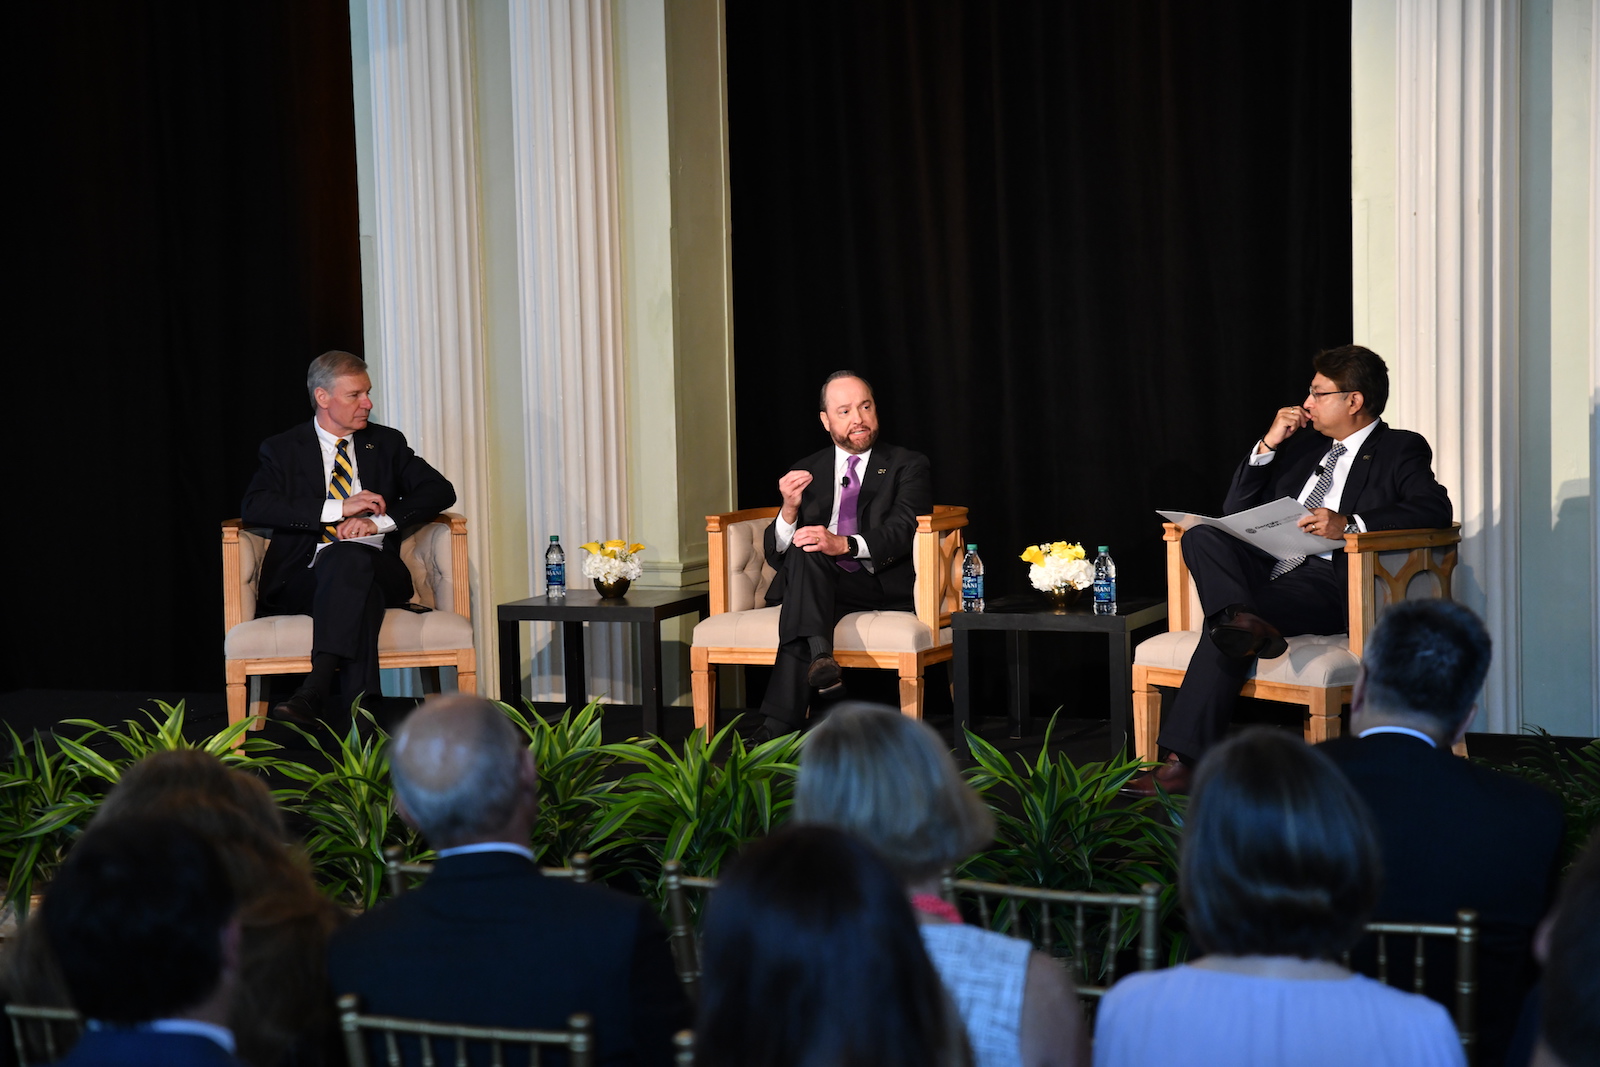 (L-R) President G.P. "Bud" Peterson; Ralph de la Vega, former vice chairman of AT&amp;T Inc; and Parmeet Grover, senior partner and managing director, The Boston Consulting Group during a panel discussion at The Biltmore.